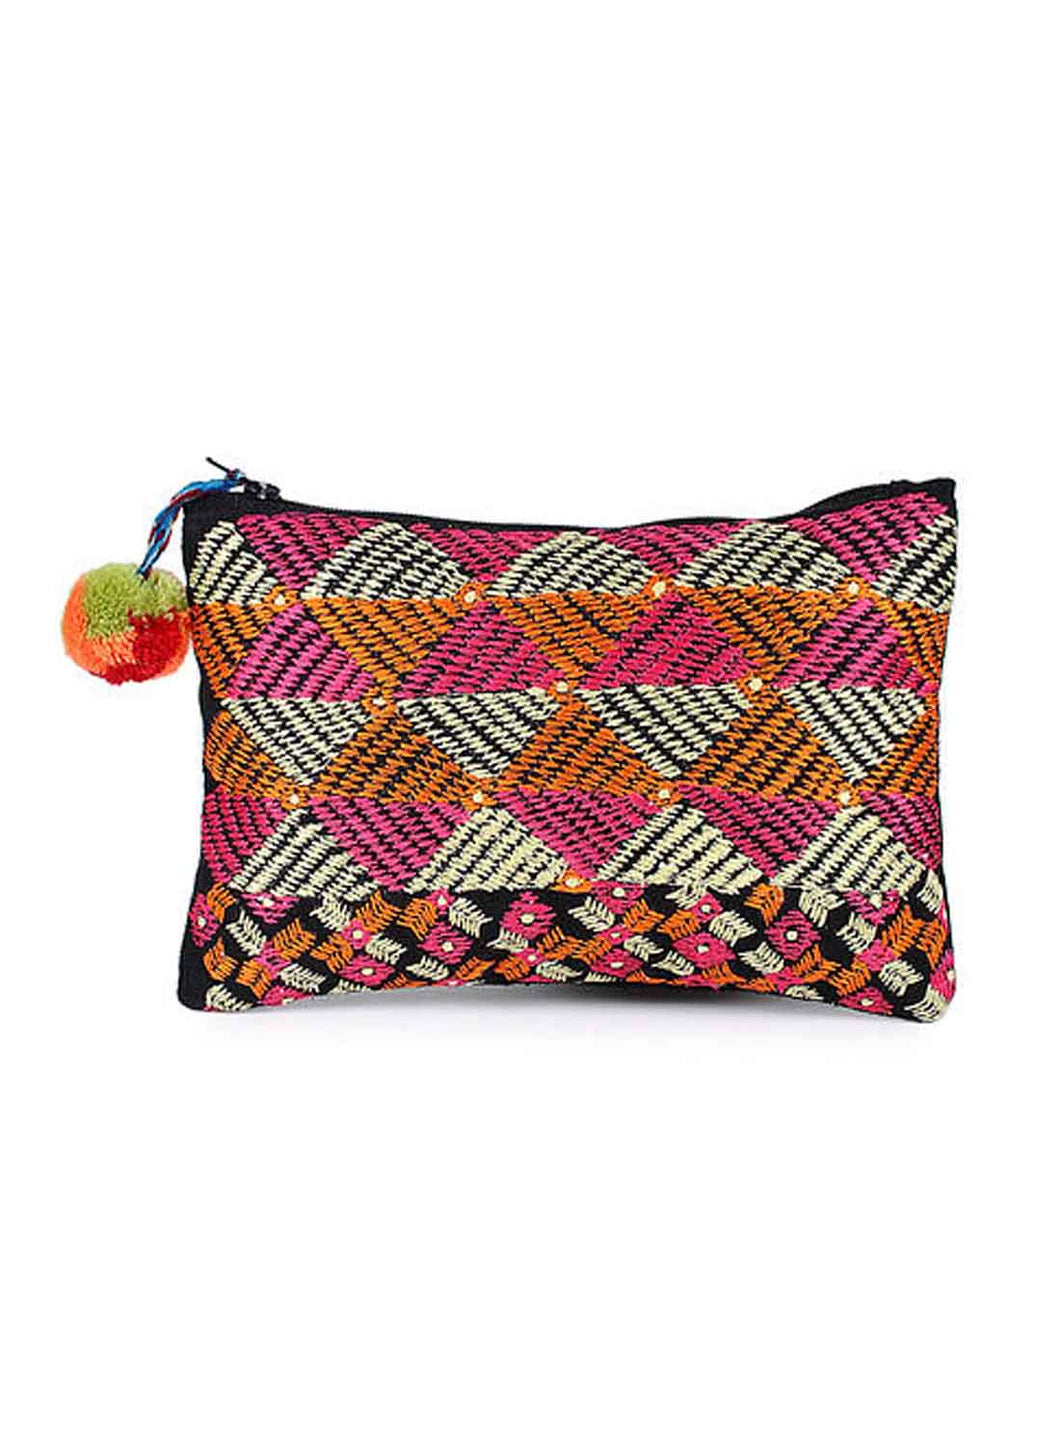 Kanyoga Casement Base All Over Phulkari Embroidery Cotton Pouch With Pom Pom Attached For Women